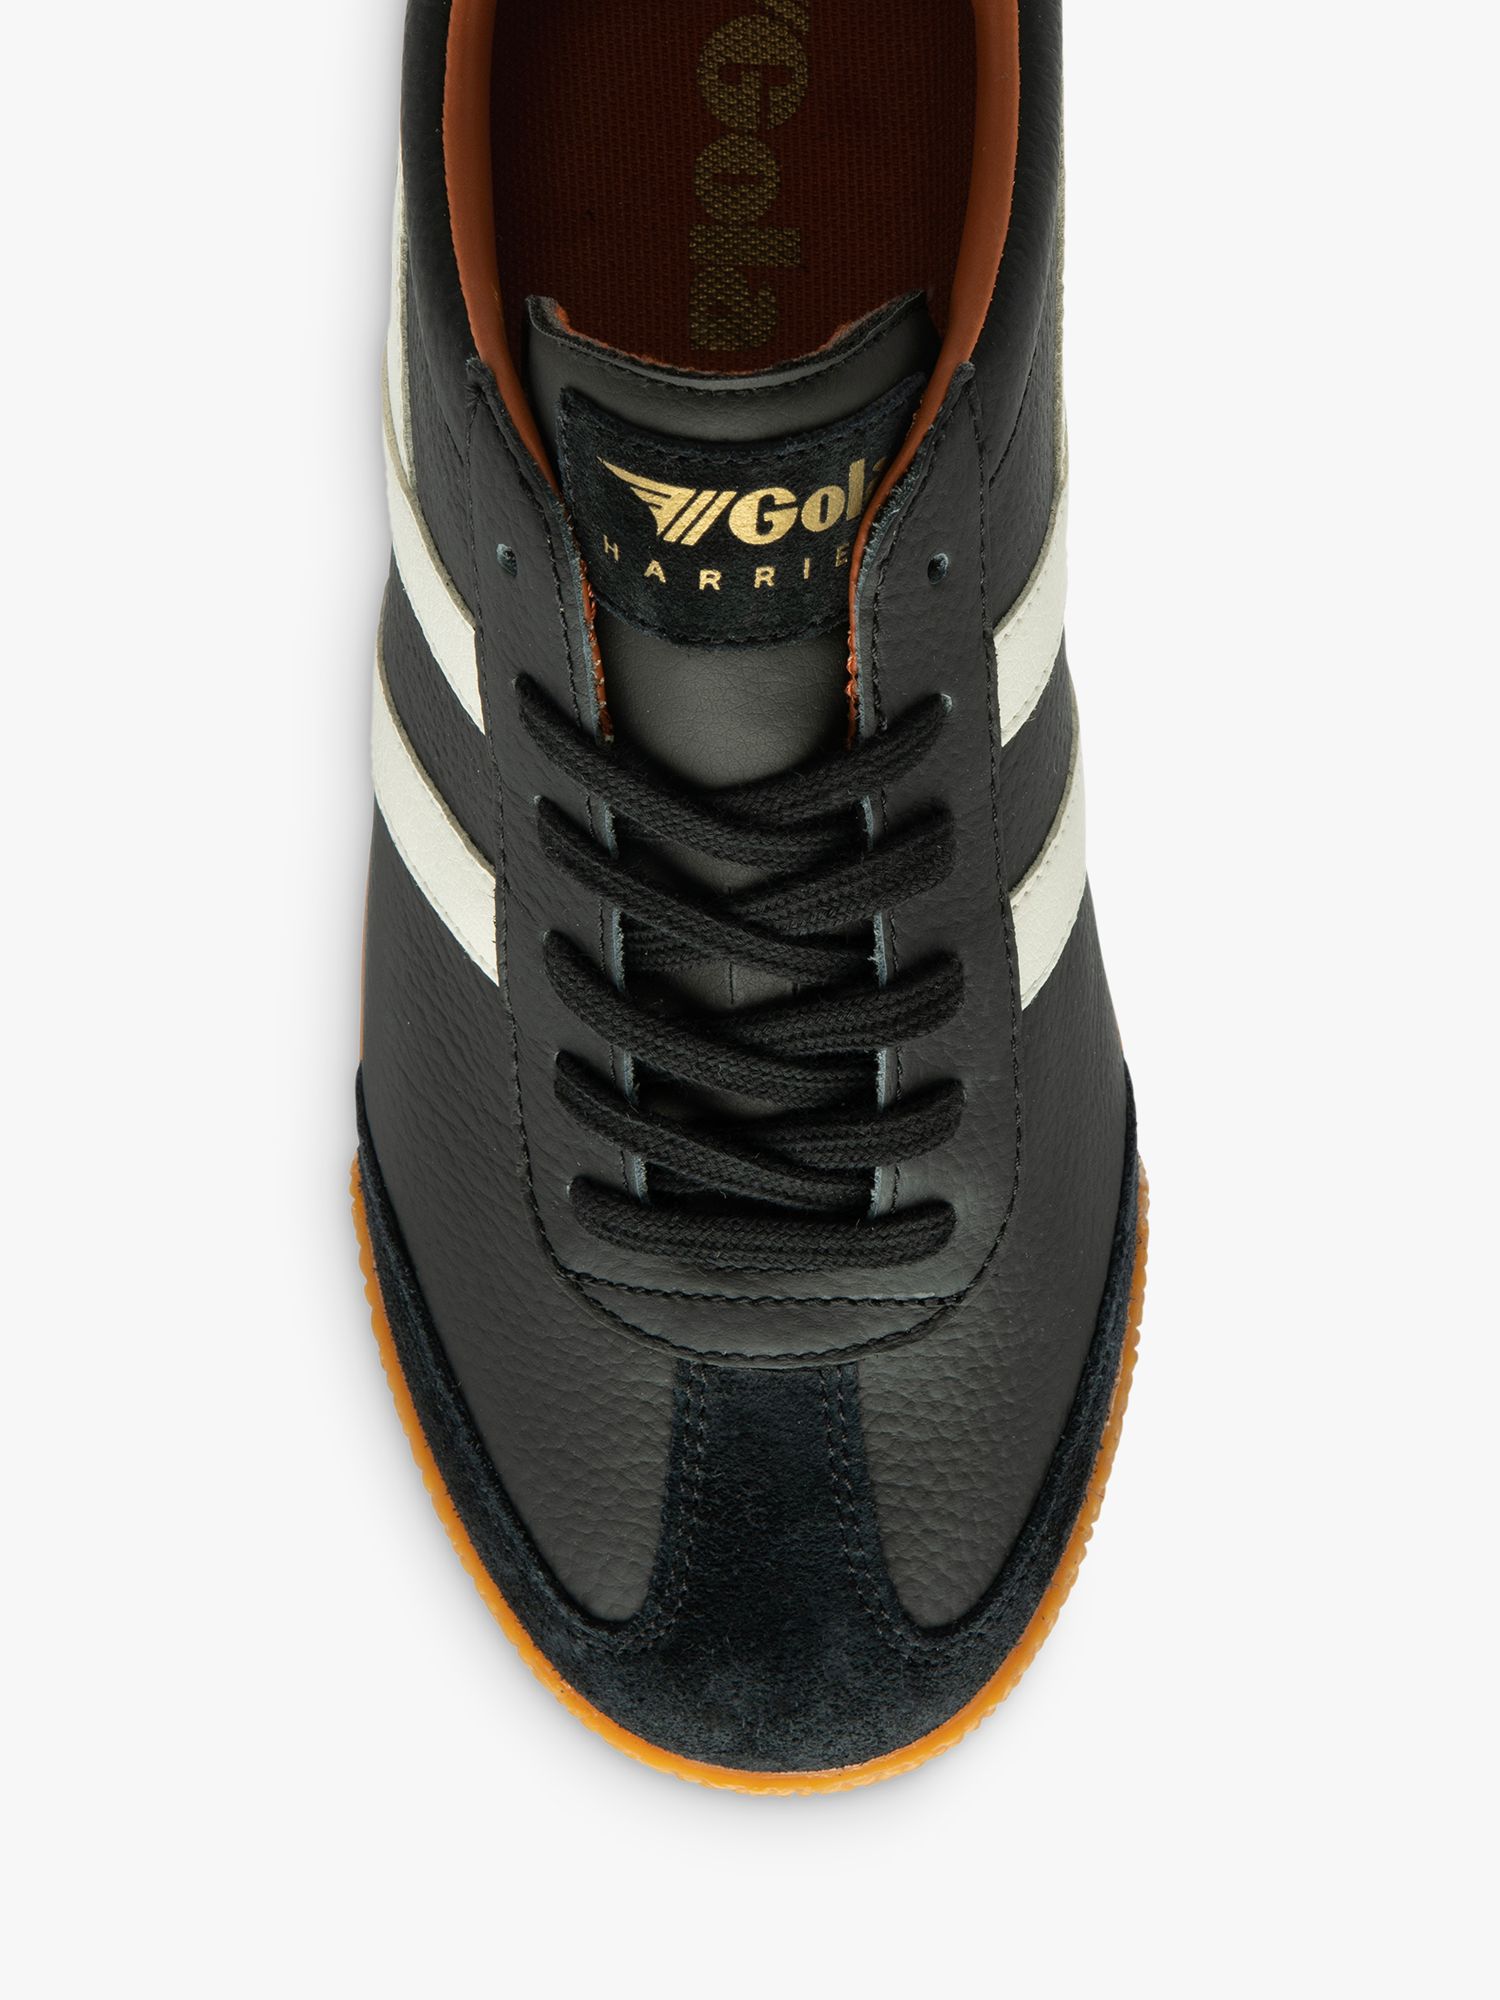 Buy Gola Classics Harrier Leather Lace Up Trainers, Black/White/Orange Online at johnlewis.com